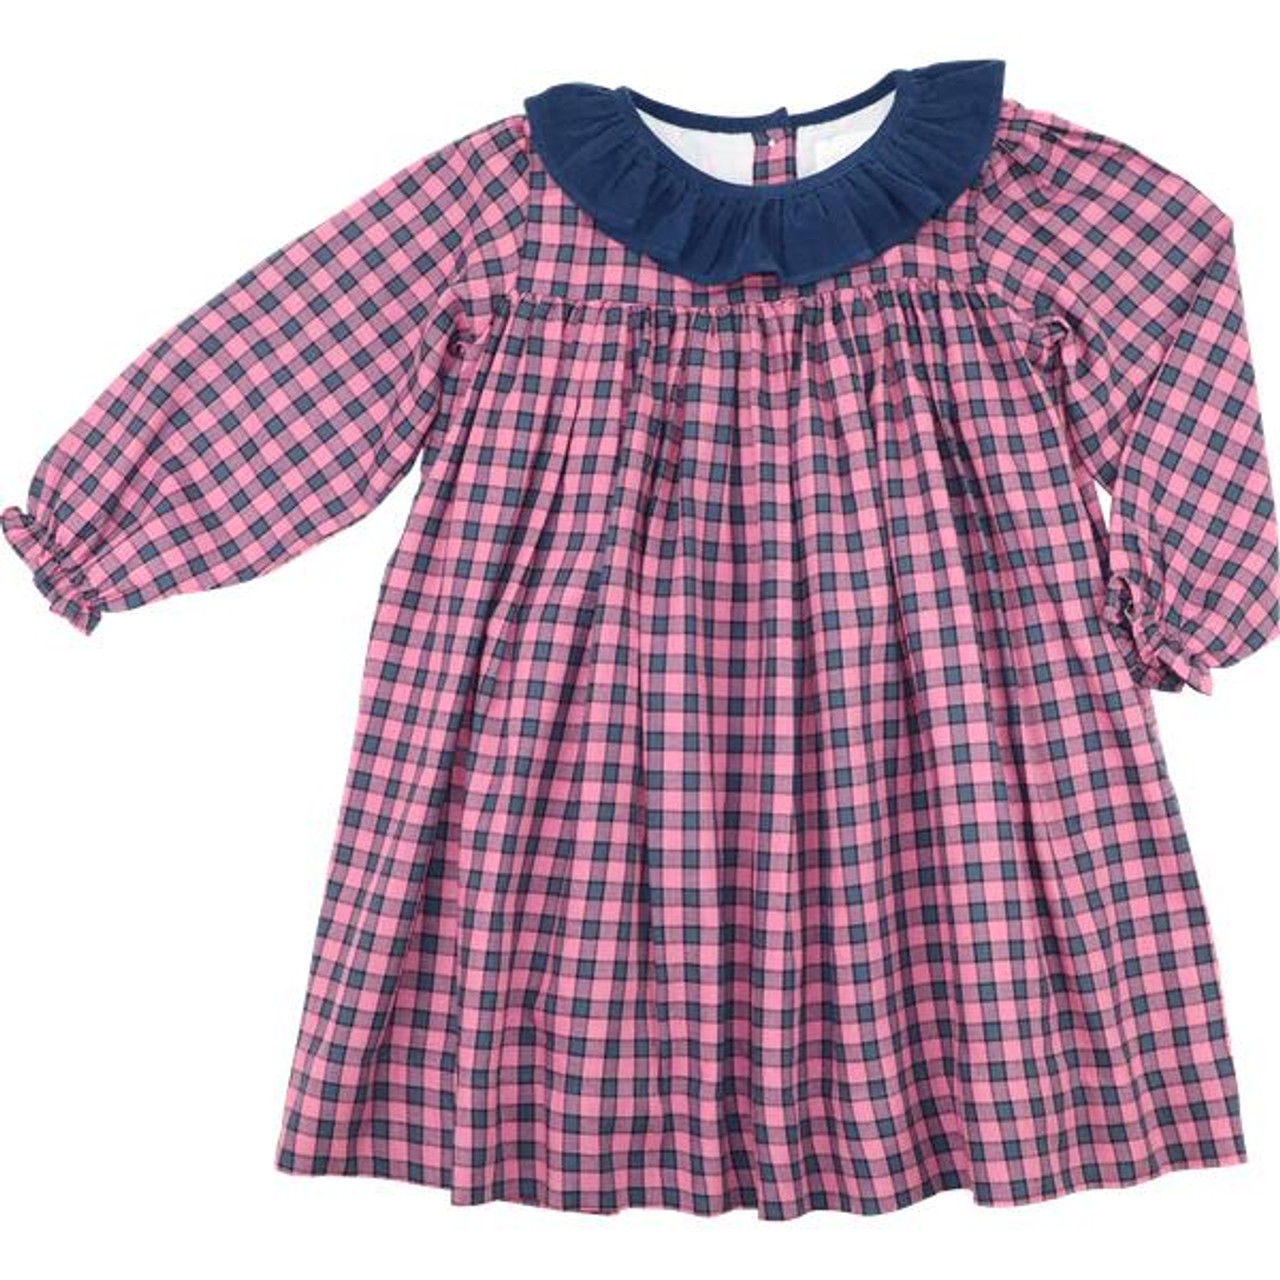 Navy and Check And Cecil Dress Lou - Flannel Pink